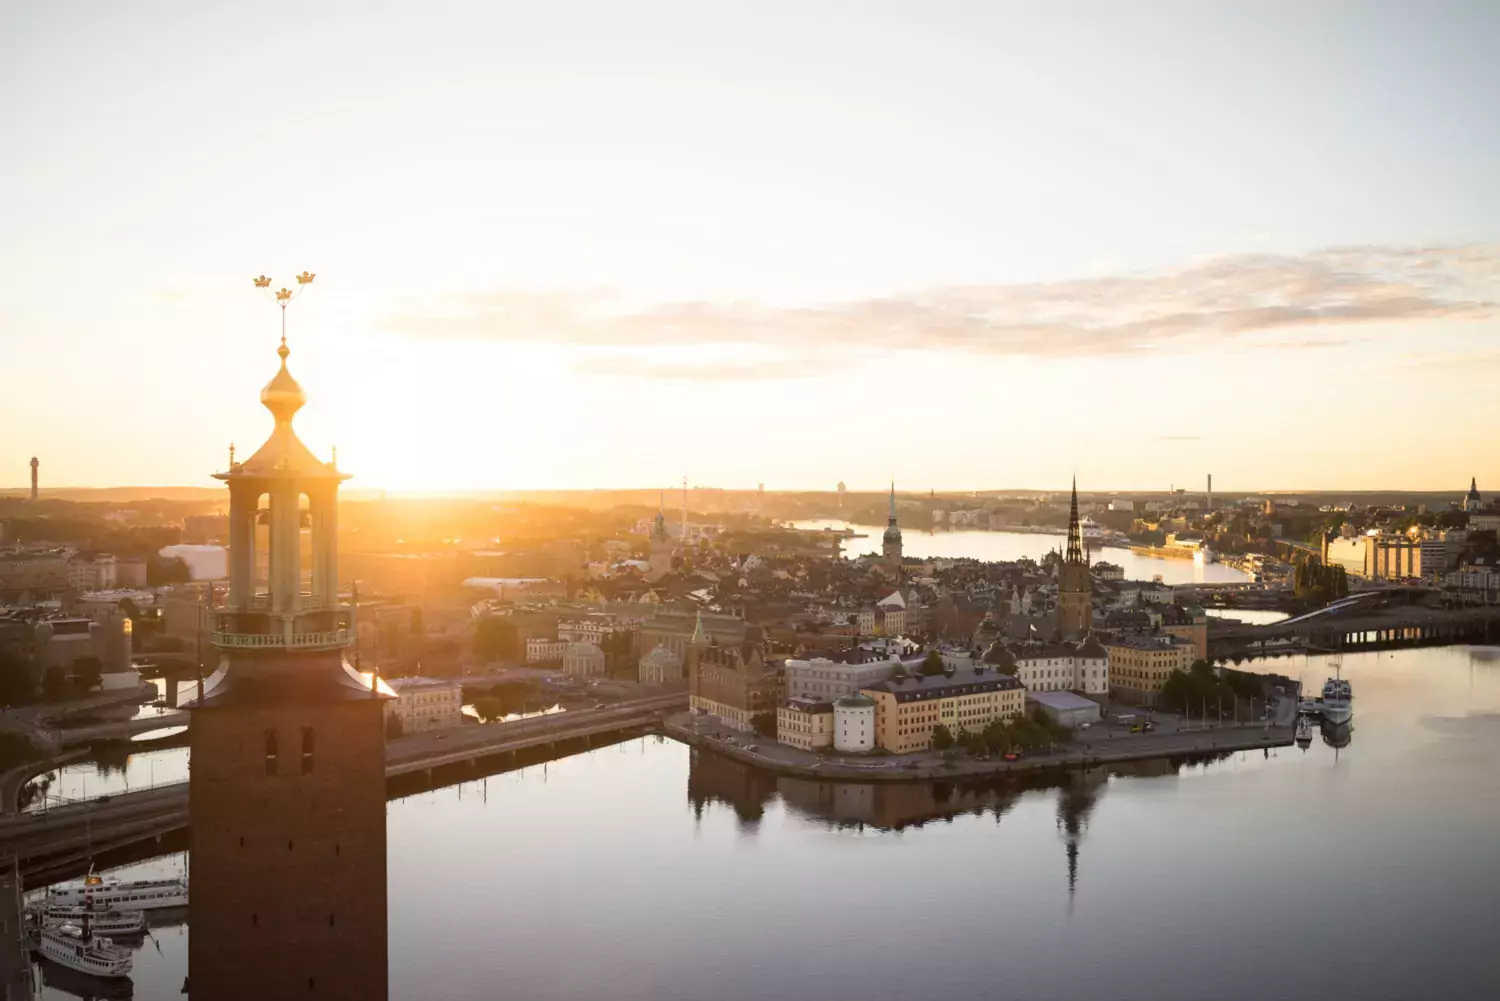 View of Stockholm, the Old Town and Södermalm, with the City Hall in the foreground.